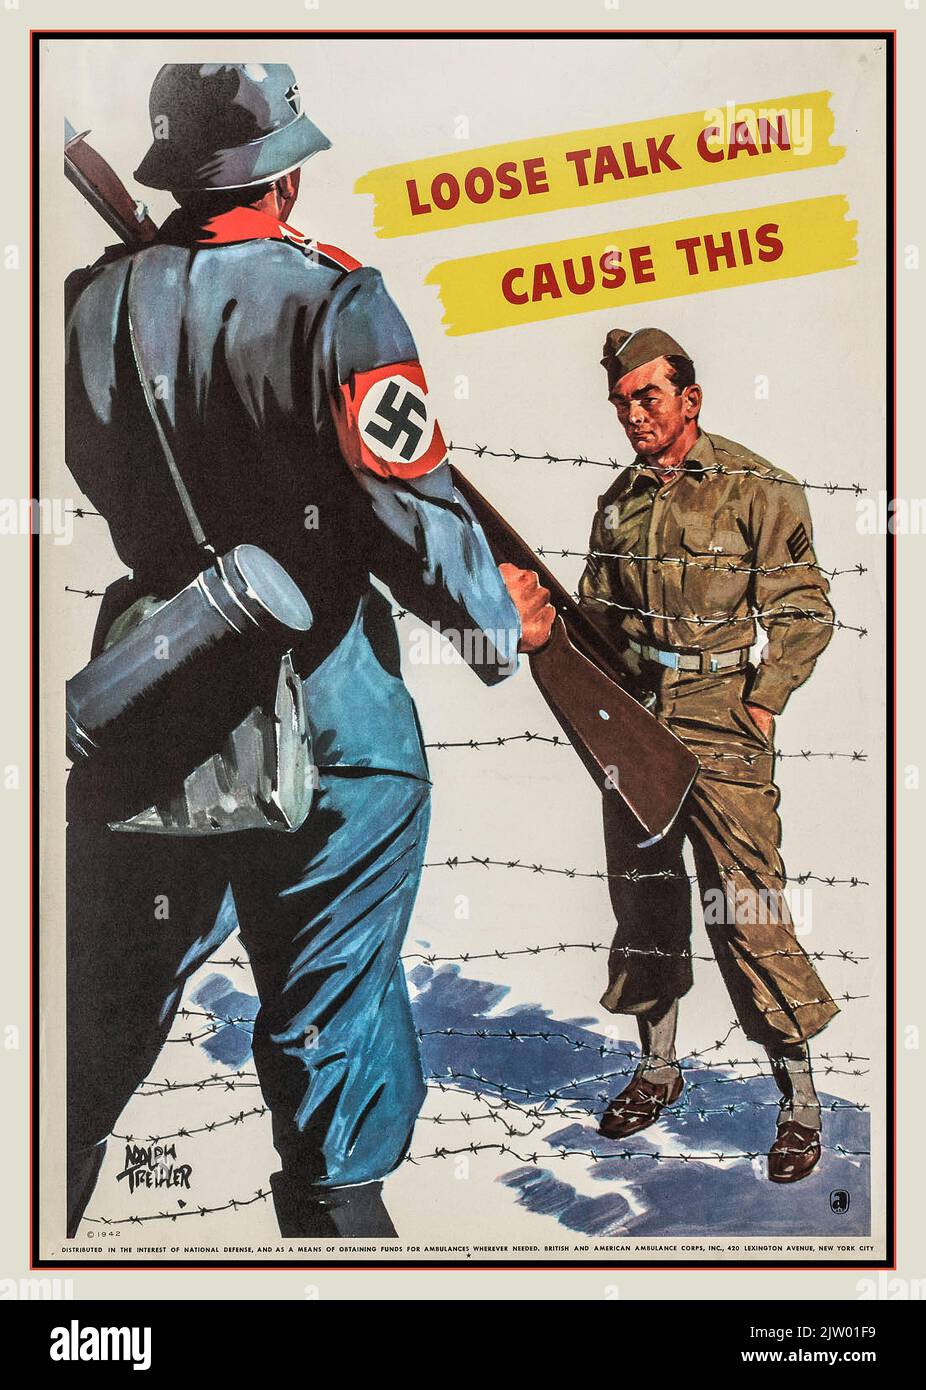 Vintage WW2 USA Poster  'Loose talk can cause this' Treidler, Adolph, b. 1886 (artist); British American Ambulance Corps (sponsor) Date issued: 1942  (poster) : color: American soldier standing behind barbed wire staring at a Nazi SS German guard. wearing a Swastika armband   War posters  Spying; National security; Prisoners of war; Soldiers  Distributed in the interest of national defense, and as a means of obtaining funds for ambulances, wherever needed. British and American Ambulance Corps, Inc., 420 Lexington Avenue, New York City; Litho in U.S.A. Stock Photo